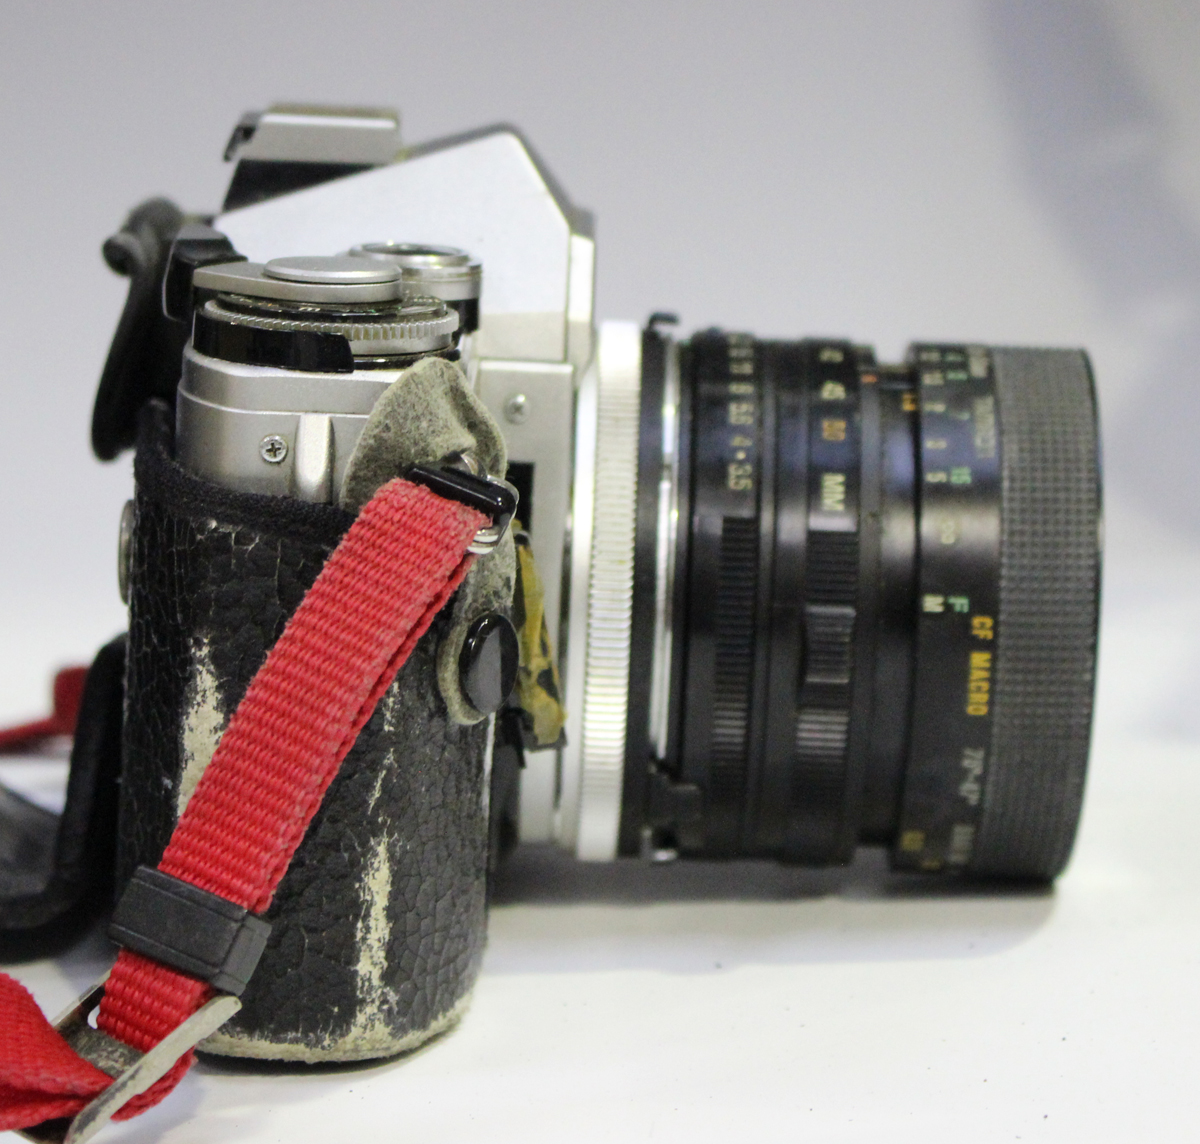 A Canon AE-1 camera, No. 4330844, with Tamron 1:3.5-4.5 28-50mm lens, together with a Tamron 1:3.8 - Image 7 of 14